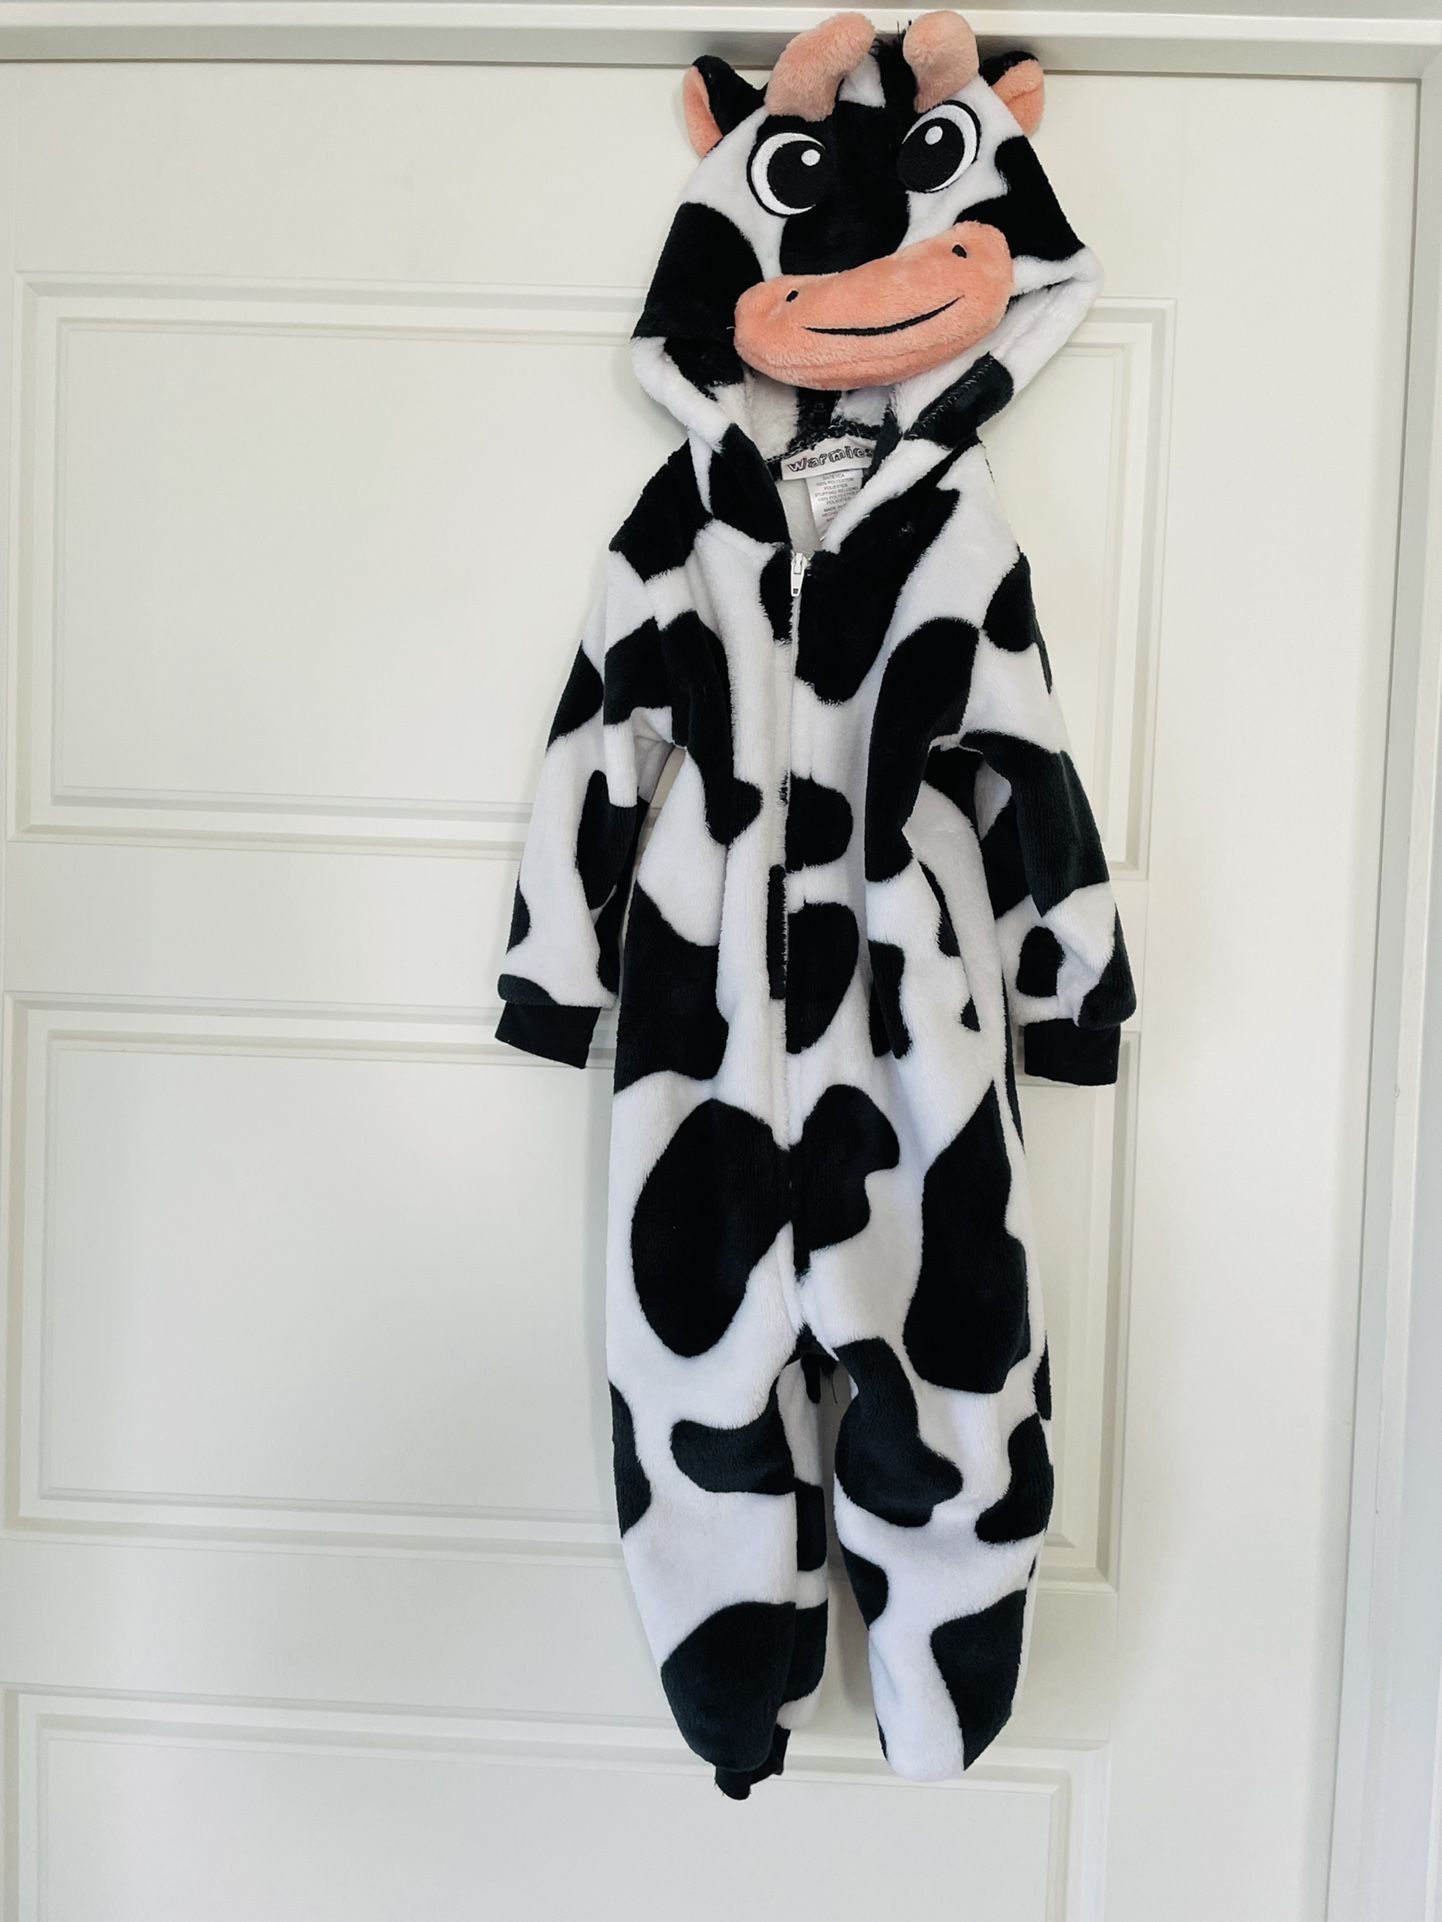 Baby Plush Cow Halloween Costume Unisex for 6-12 months